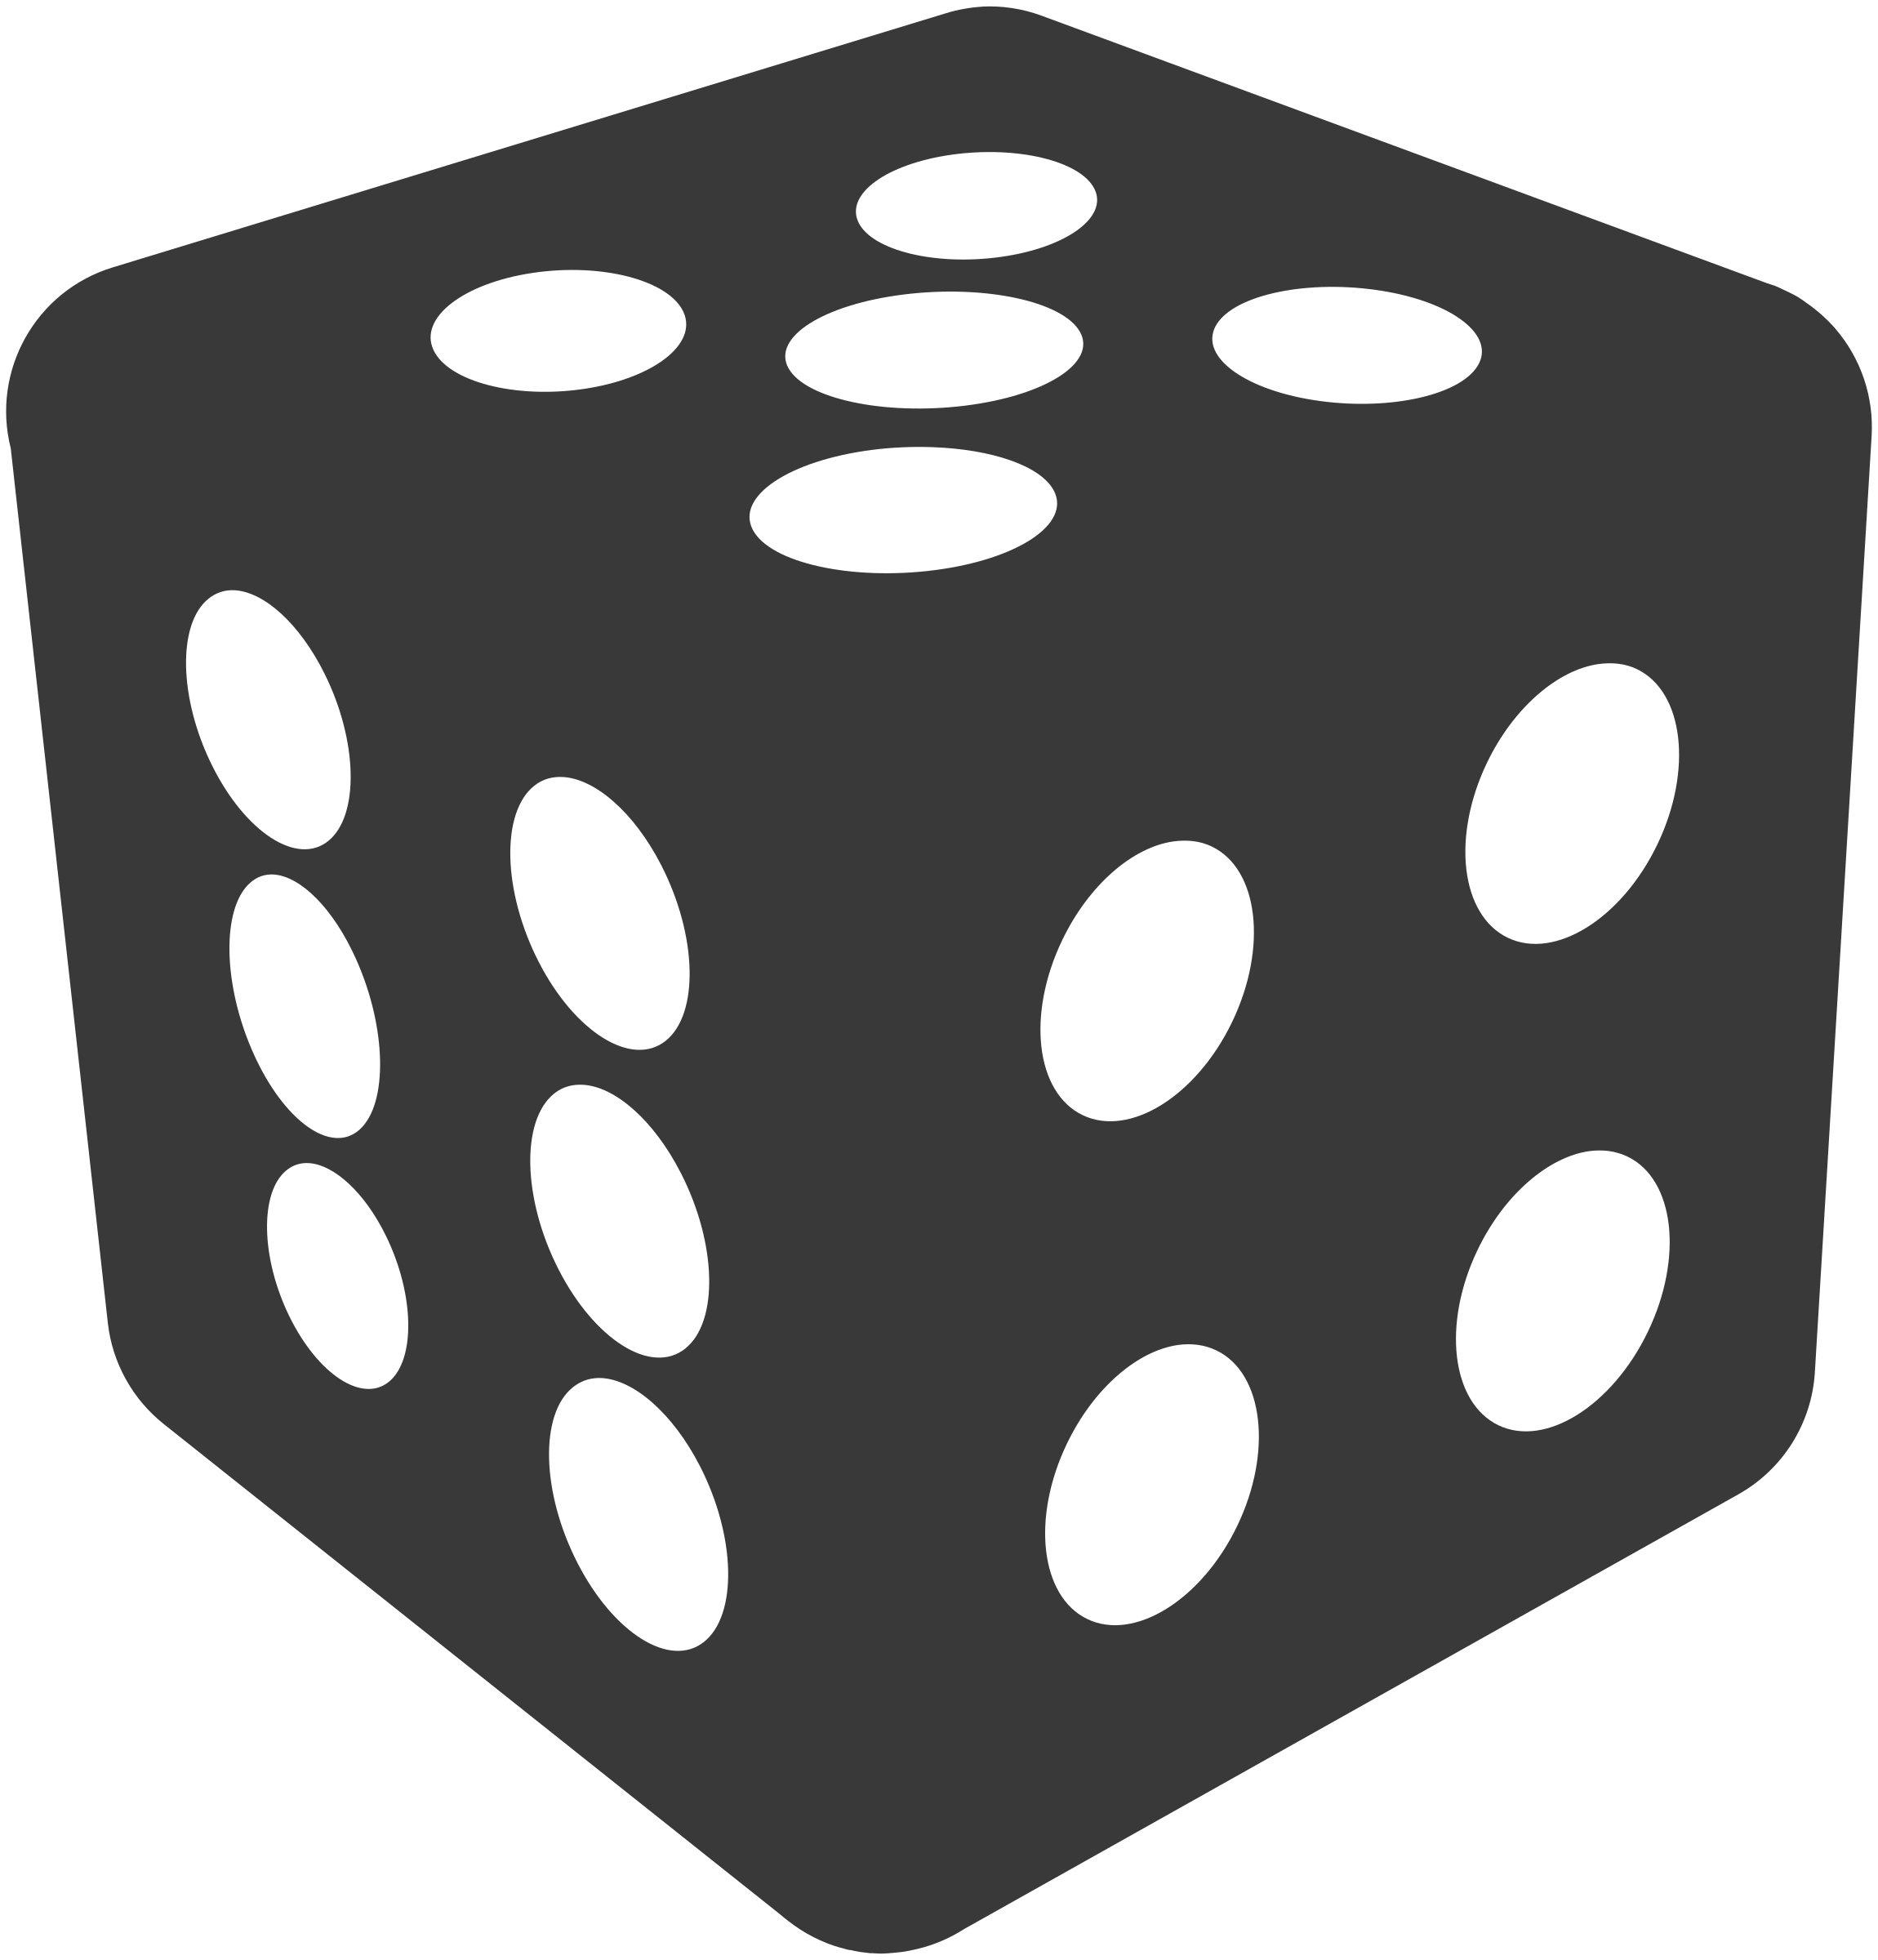 dice clipart clemency